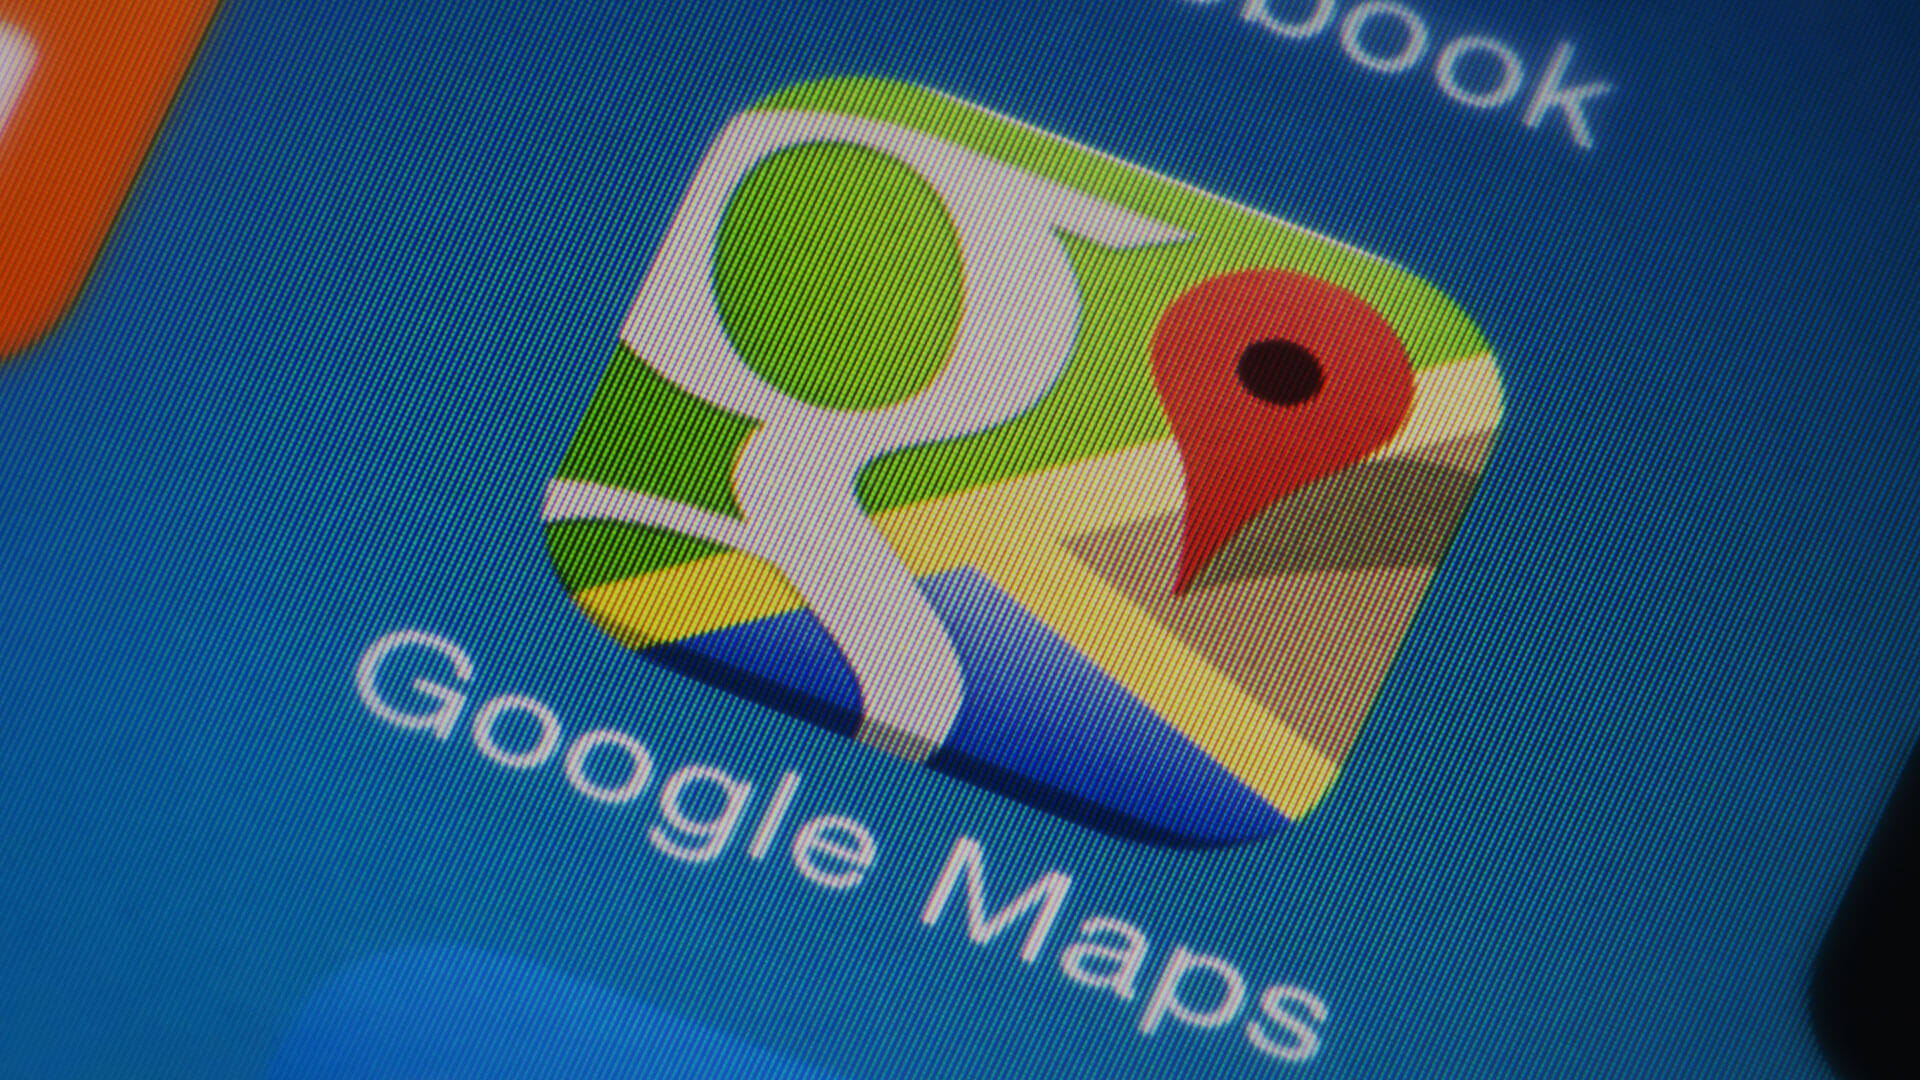 Millions of fake Google Maps listings hurt real business and consumers